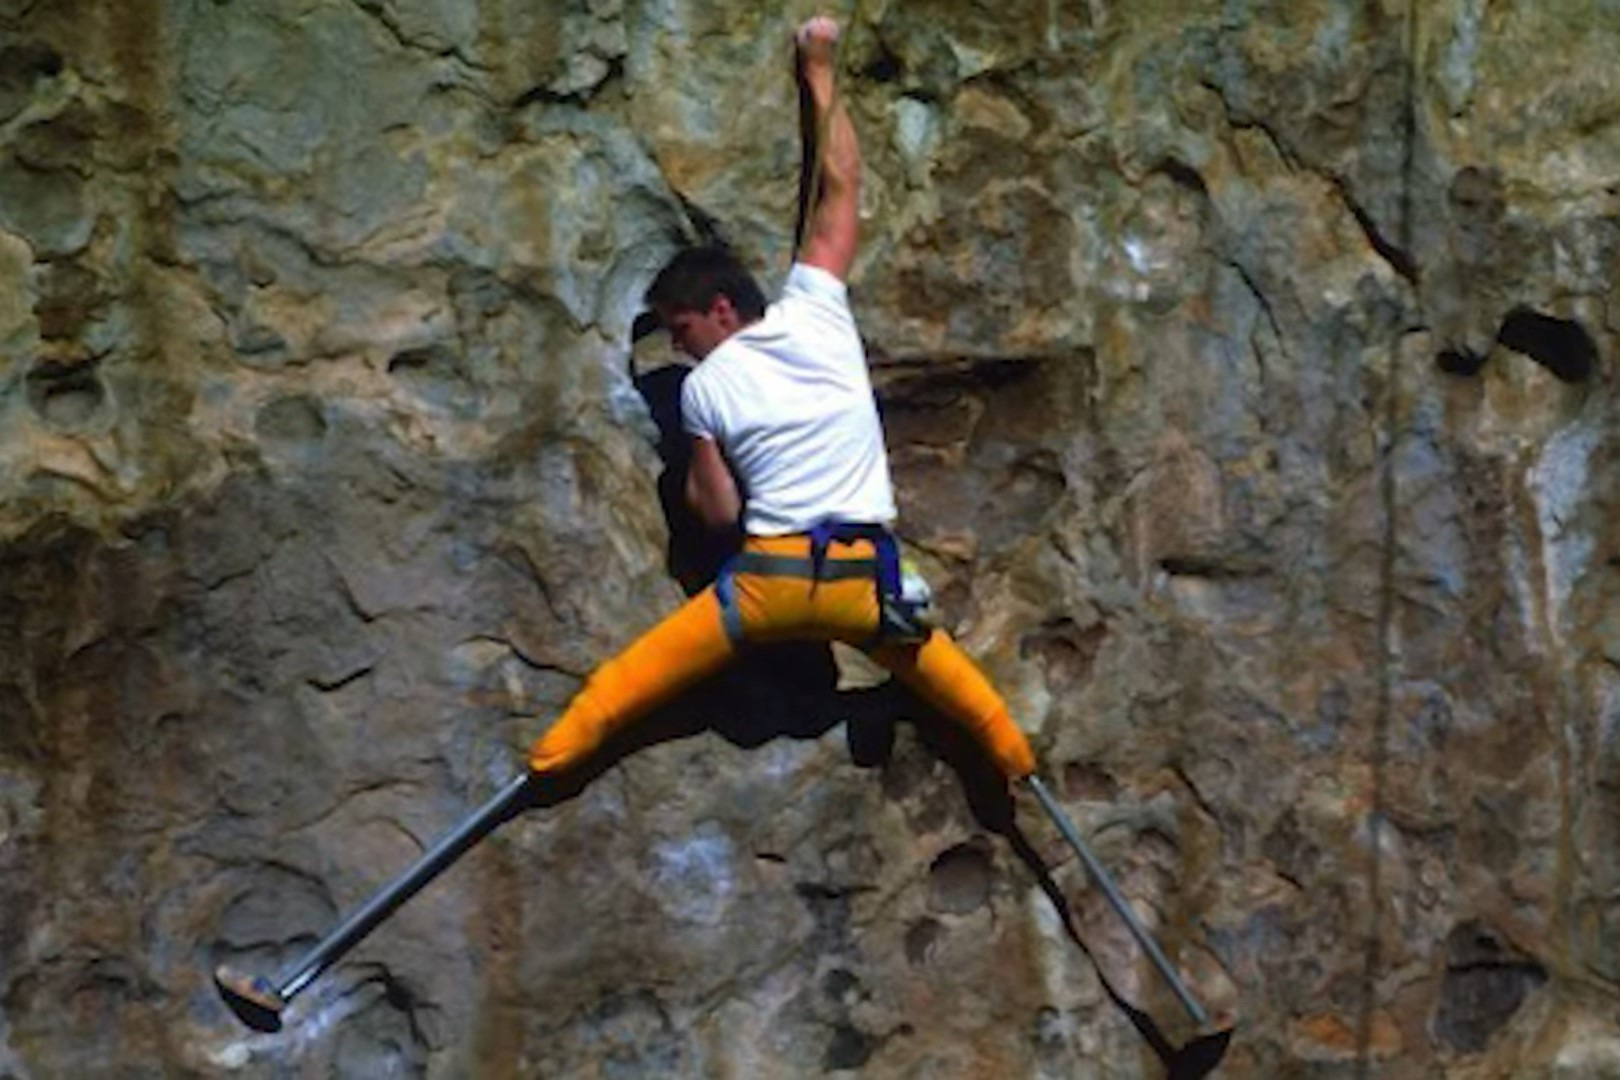 A man with prosthetic legs climbing a rock wall